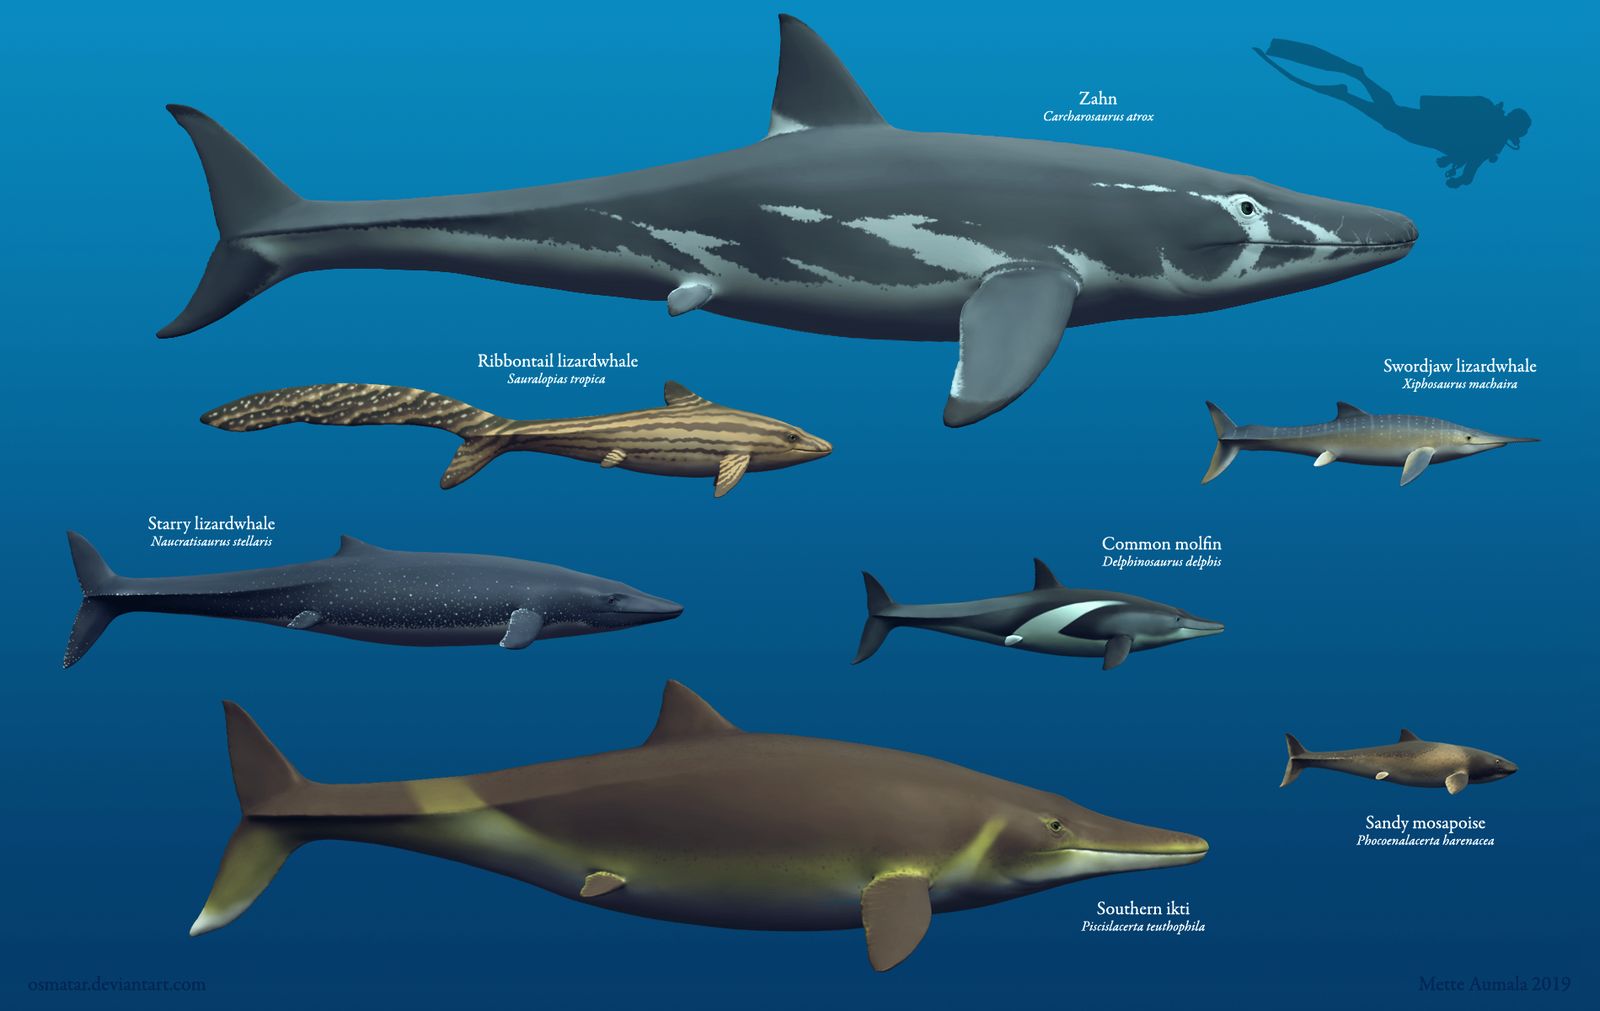 An assortment of speculative mosasaurs by Mette Aumal